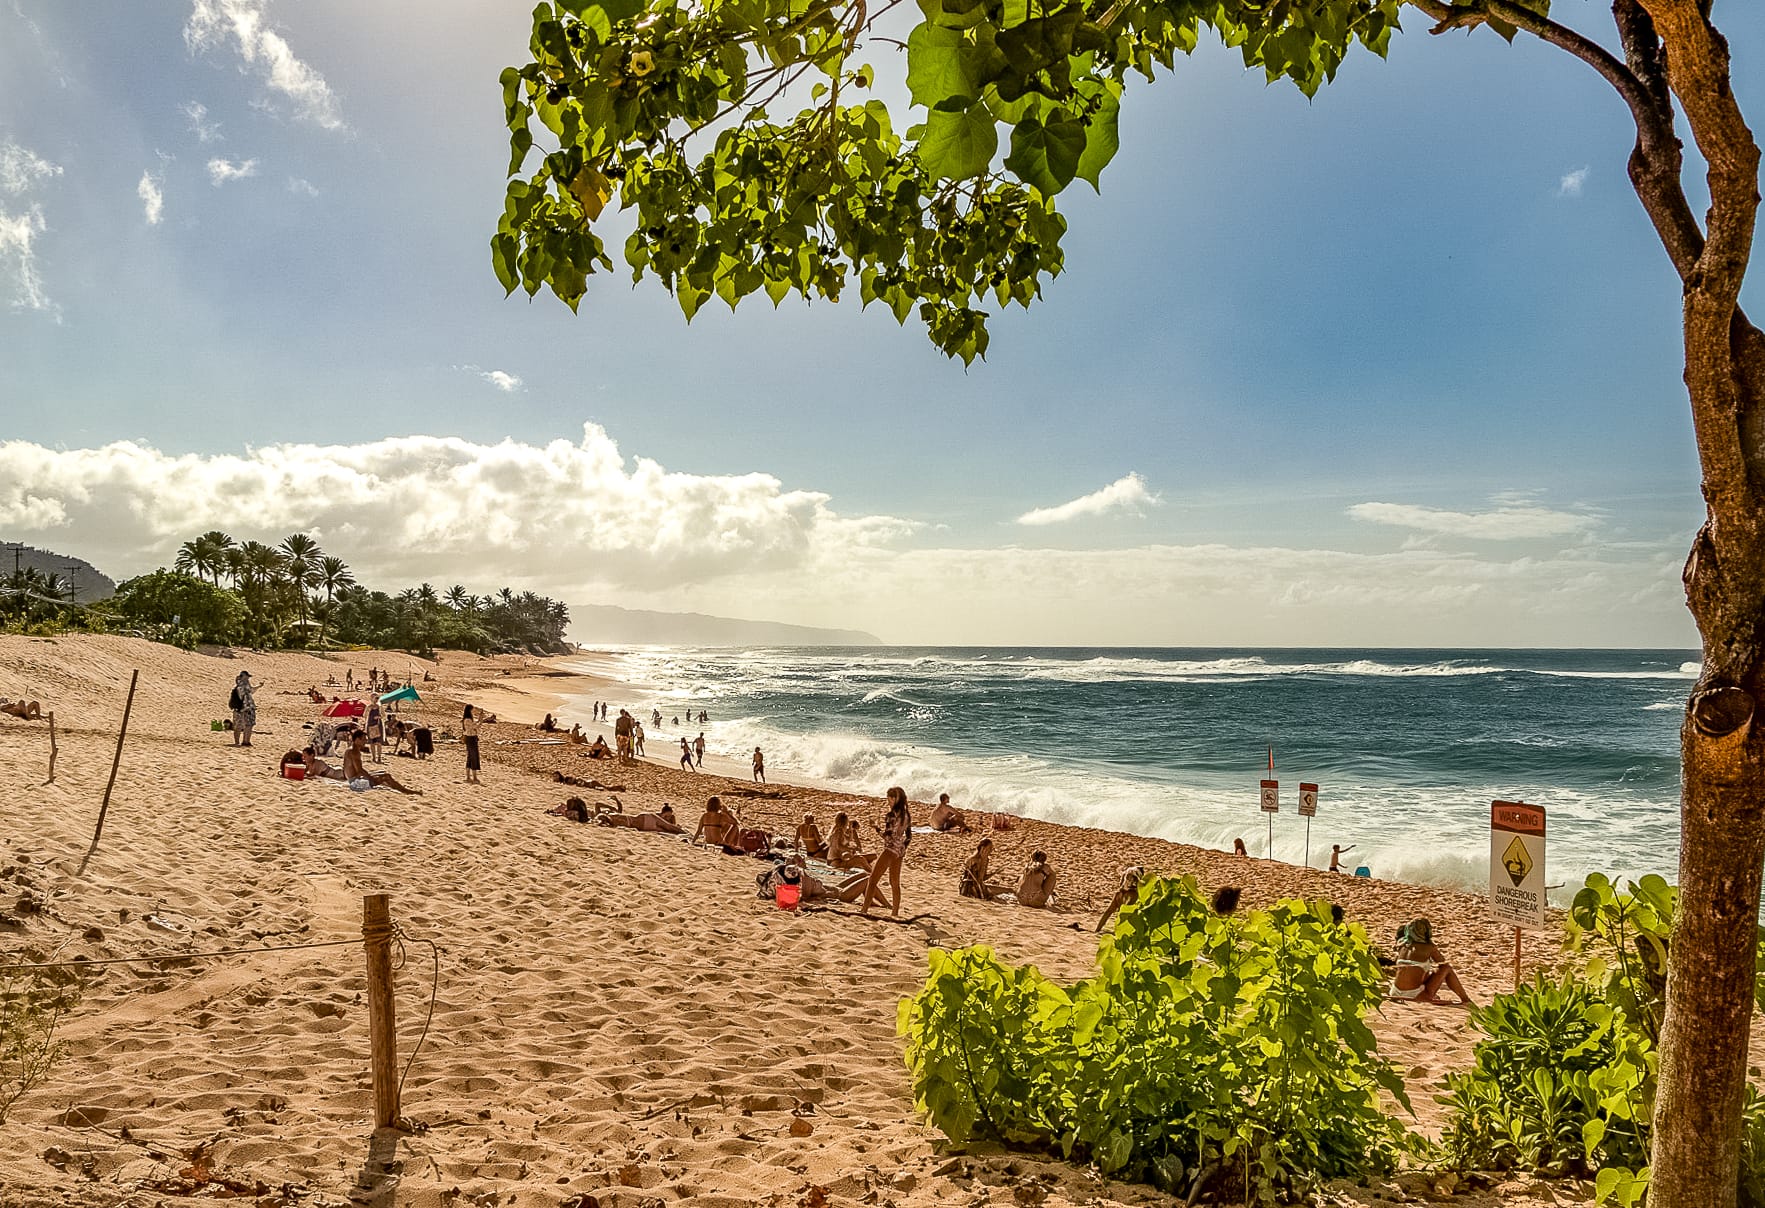 North Shore Oahu Haleiwa Best Beaches And More